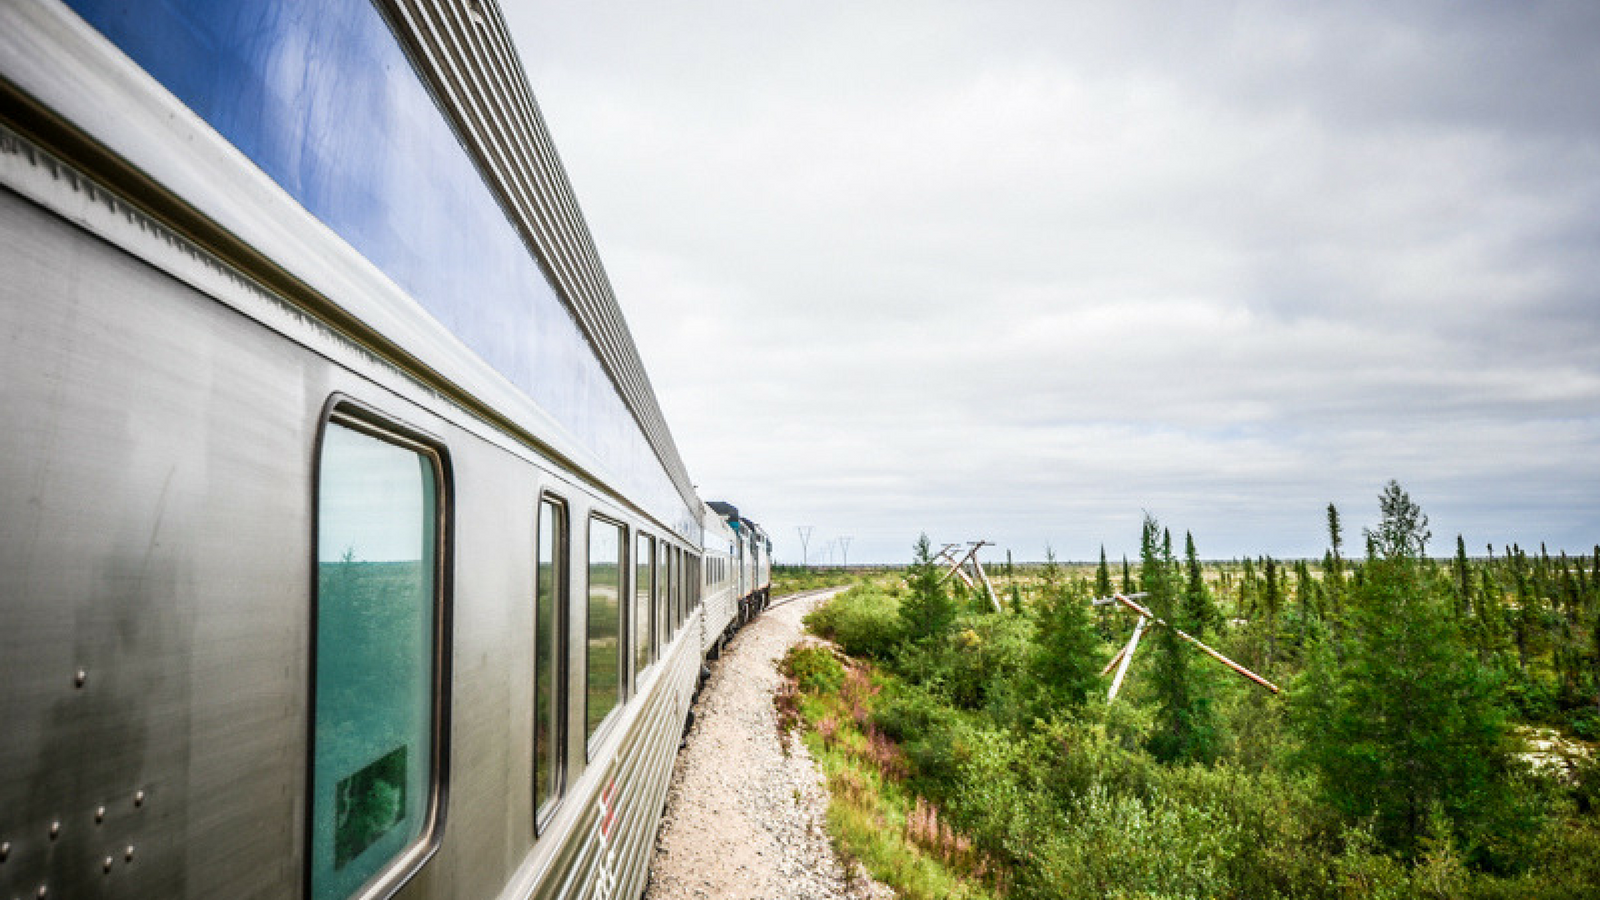 Travel Across Canada with VIA Rail - The Ultimate Canadian Adventure